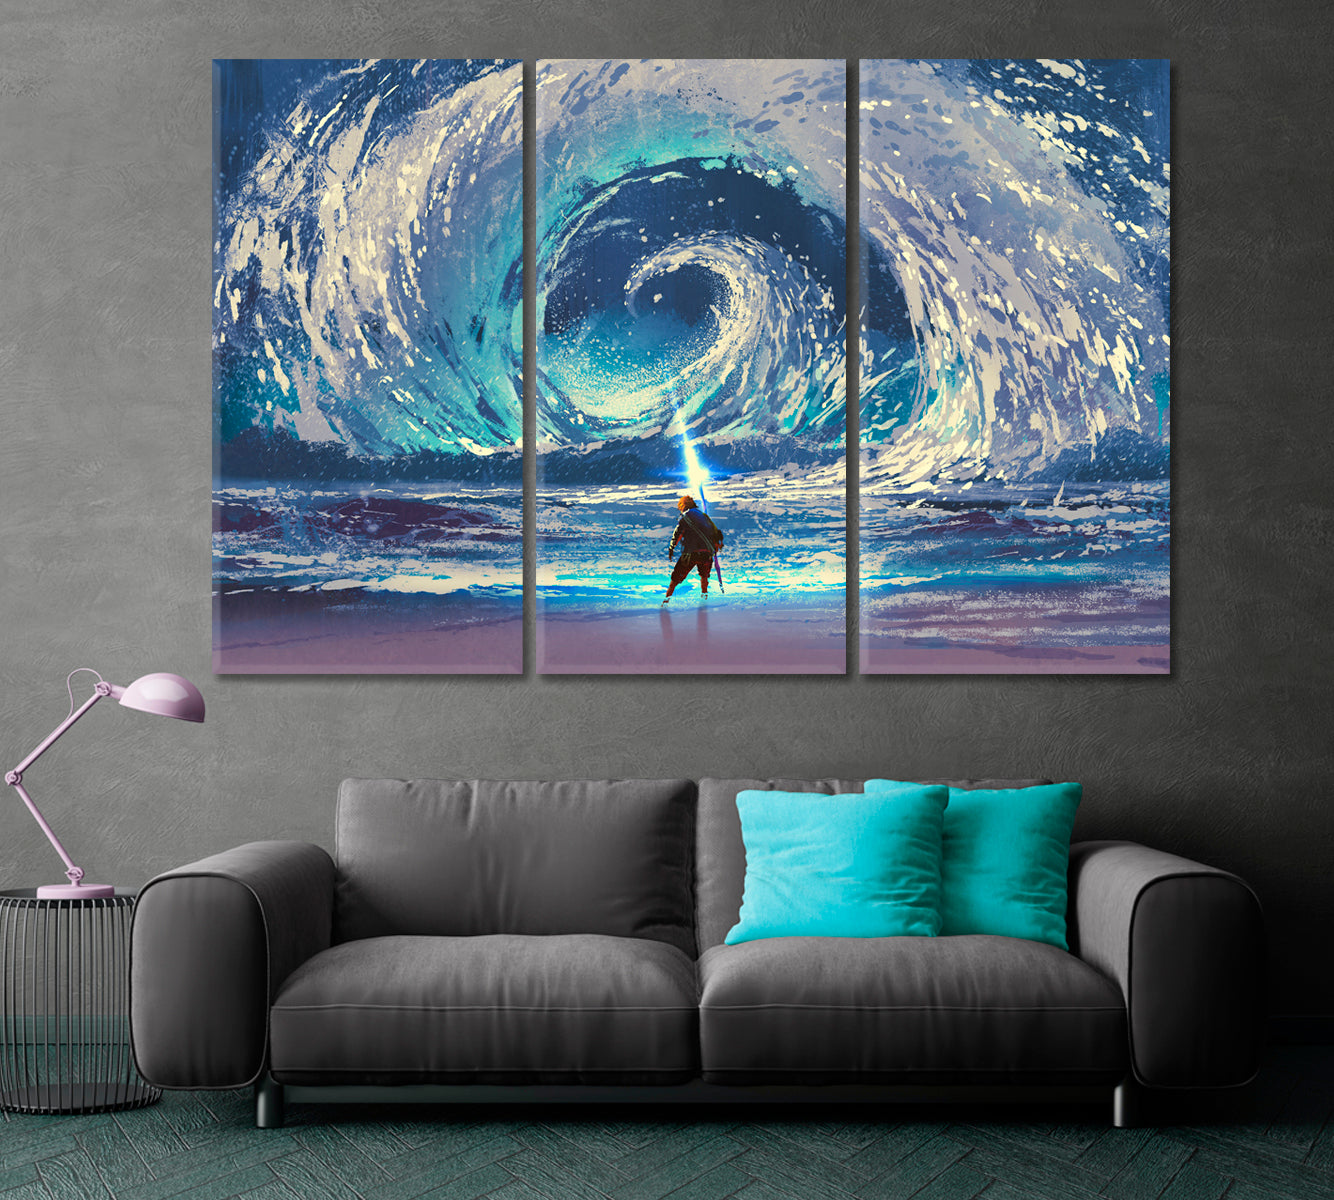 Man Magic Spear Swirling Sea In The Sky Surreal Art Abstract Art Print Artesty 3 panels 36" x 24" 